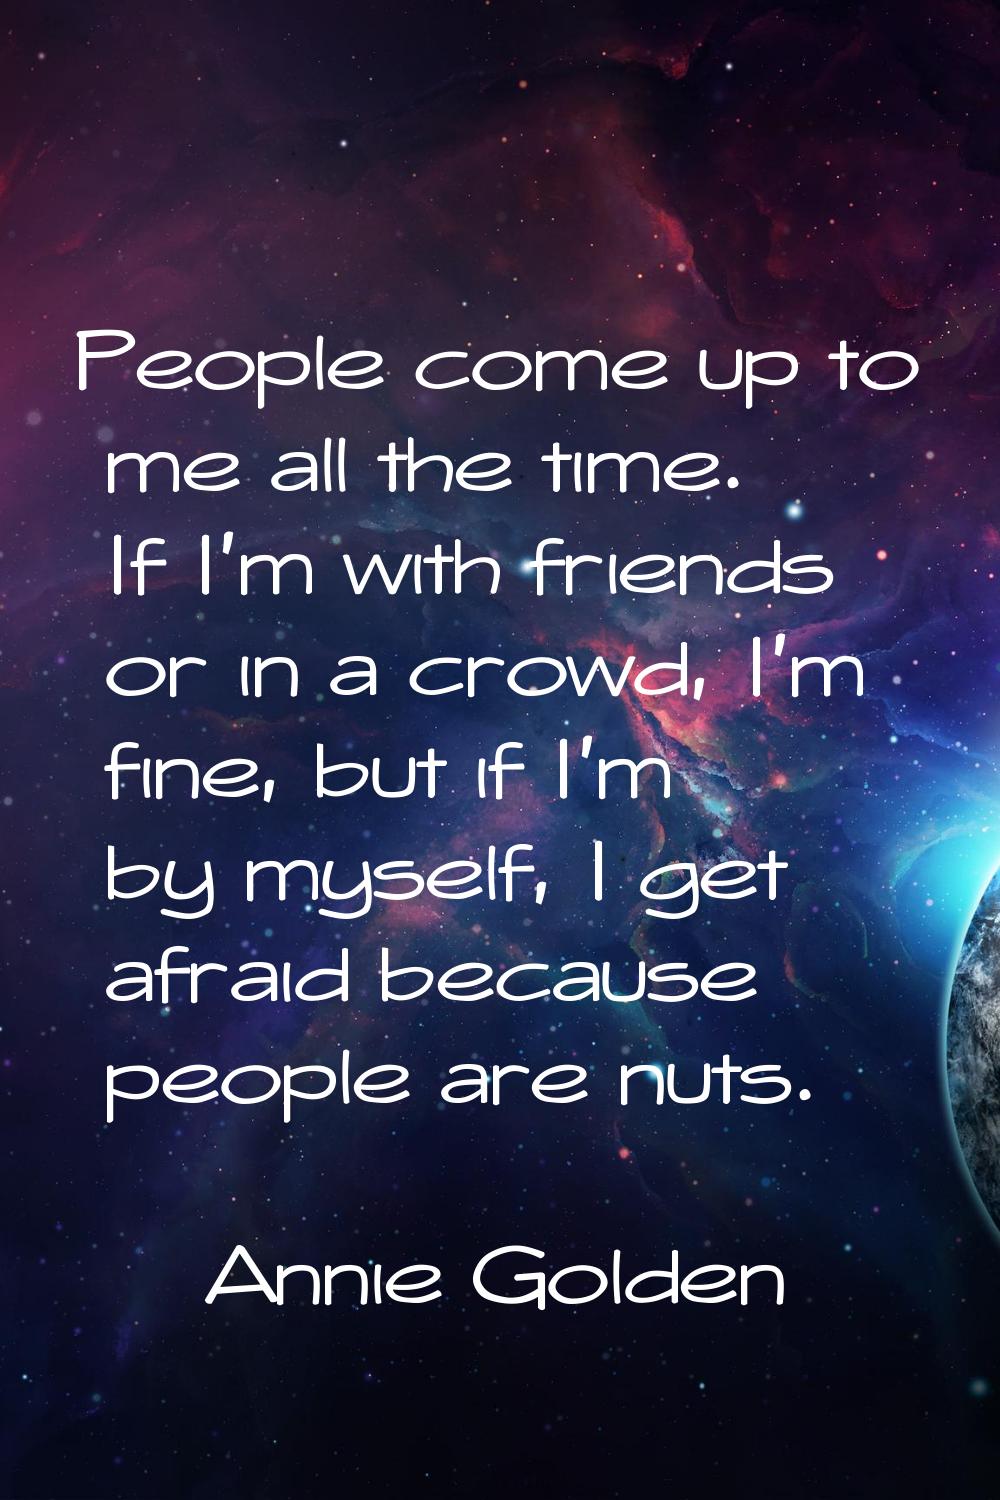 People come up to me all the time. If I'm with friends or in a crowd, I'm fine, but if I'm by mysel